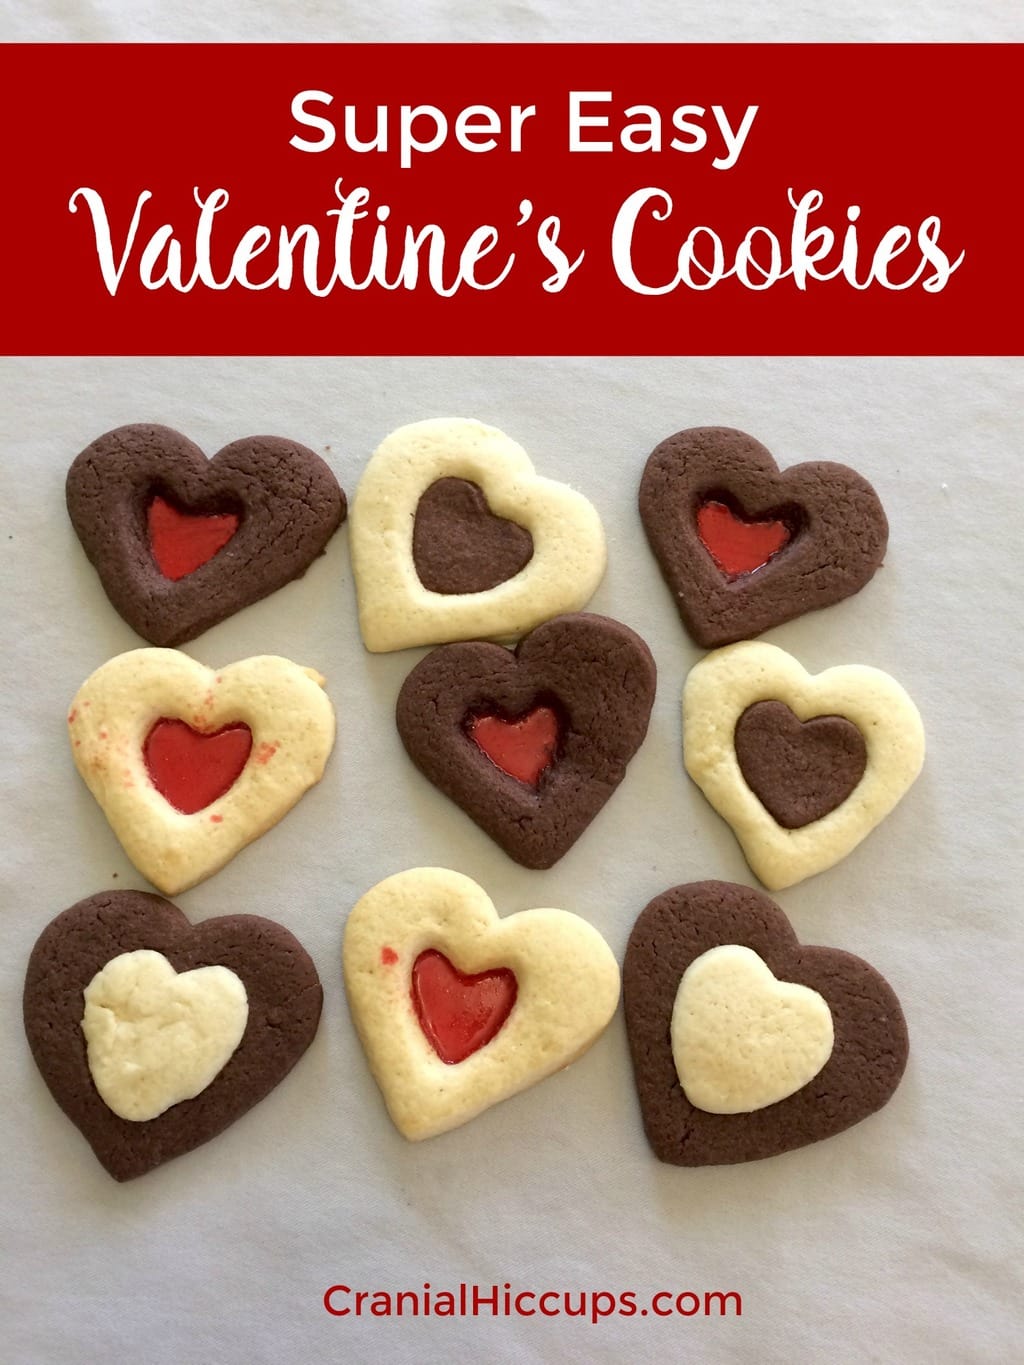 Super Easy Valentine's Cookies (With regular and chocolate Sugar Cookie ...